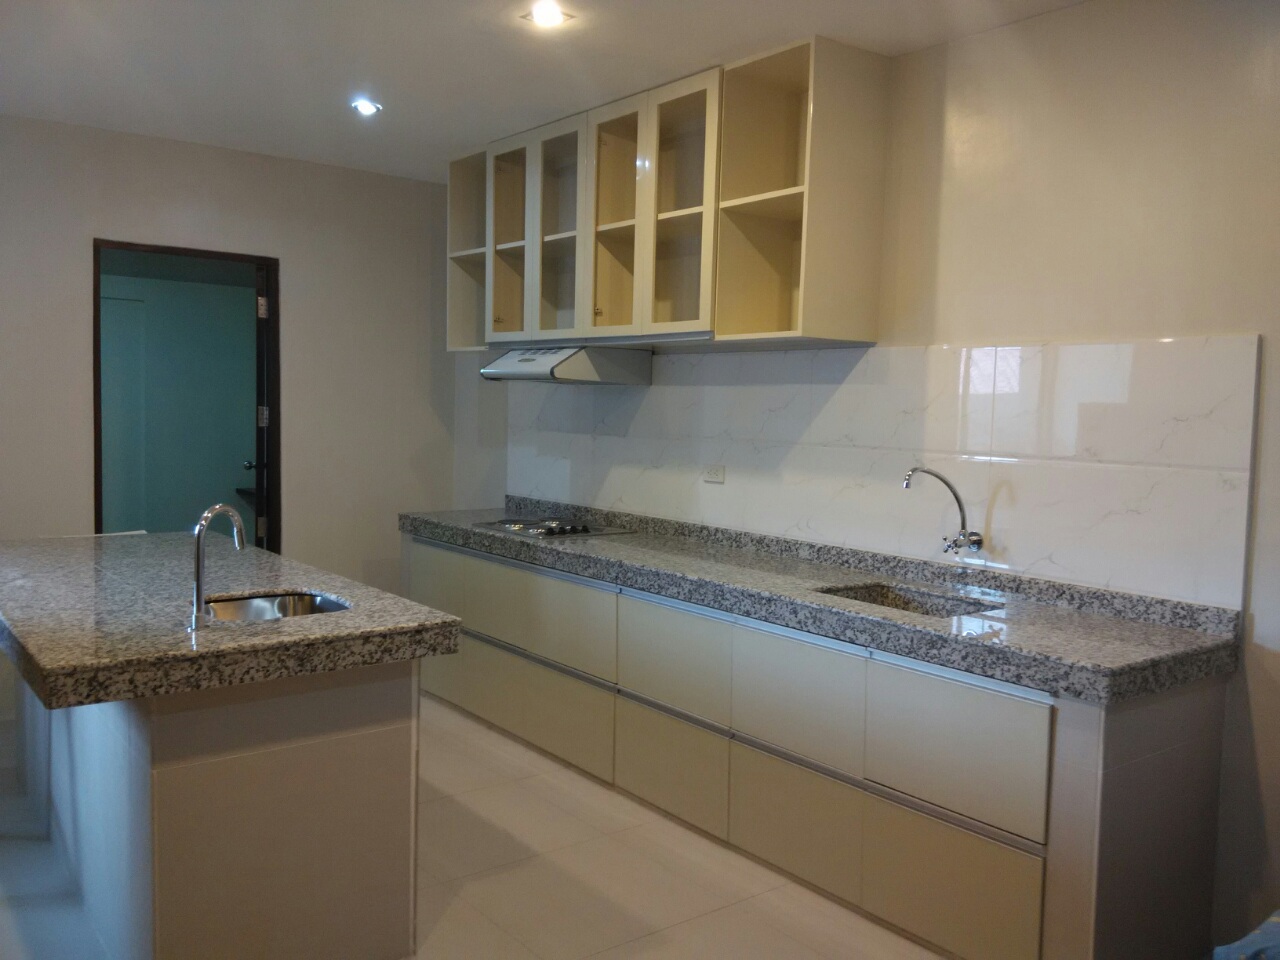 Brand New 2 Bedroom Fully Furnished House for Rent in Cebu City Mabolo